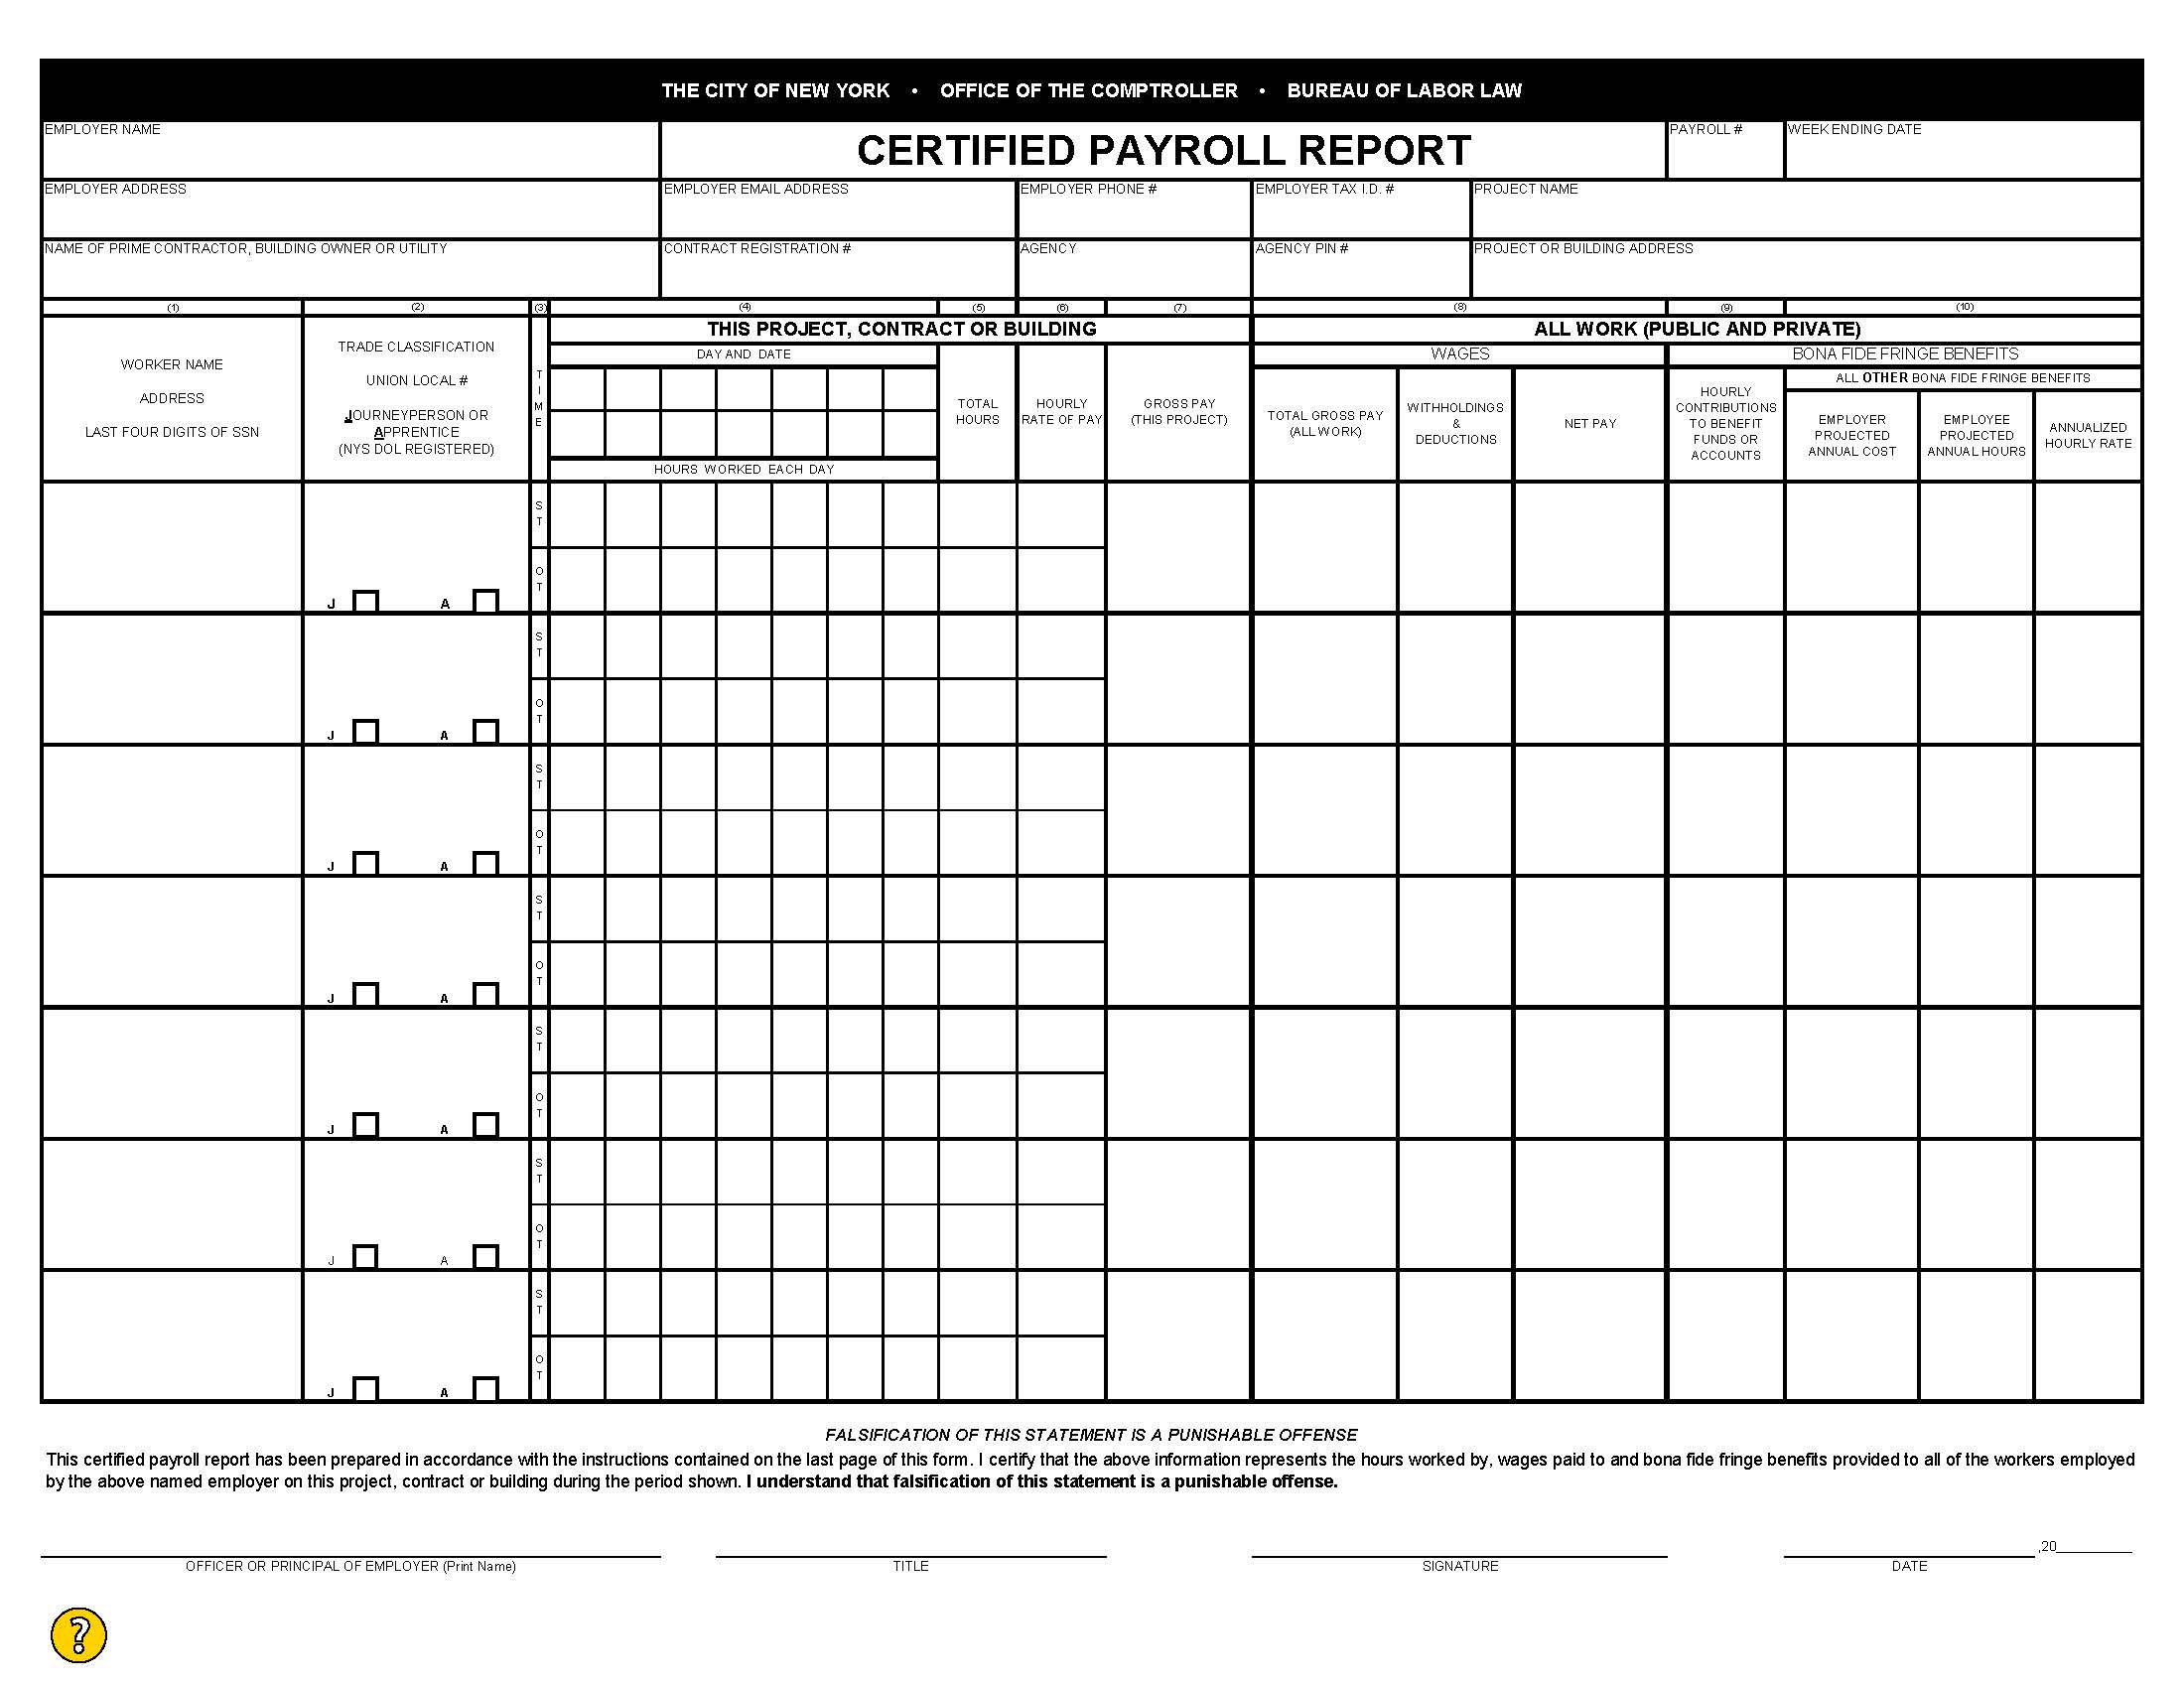 Payroll Report Template from comptroller.nyc.gov